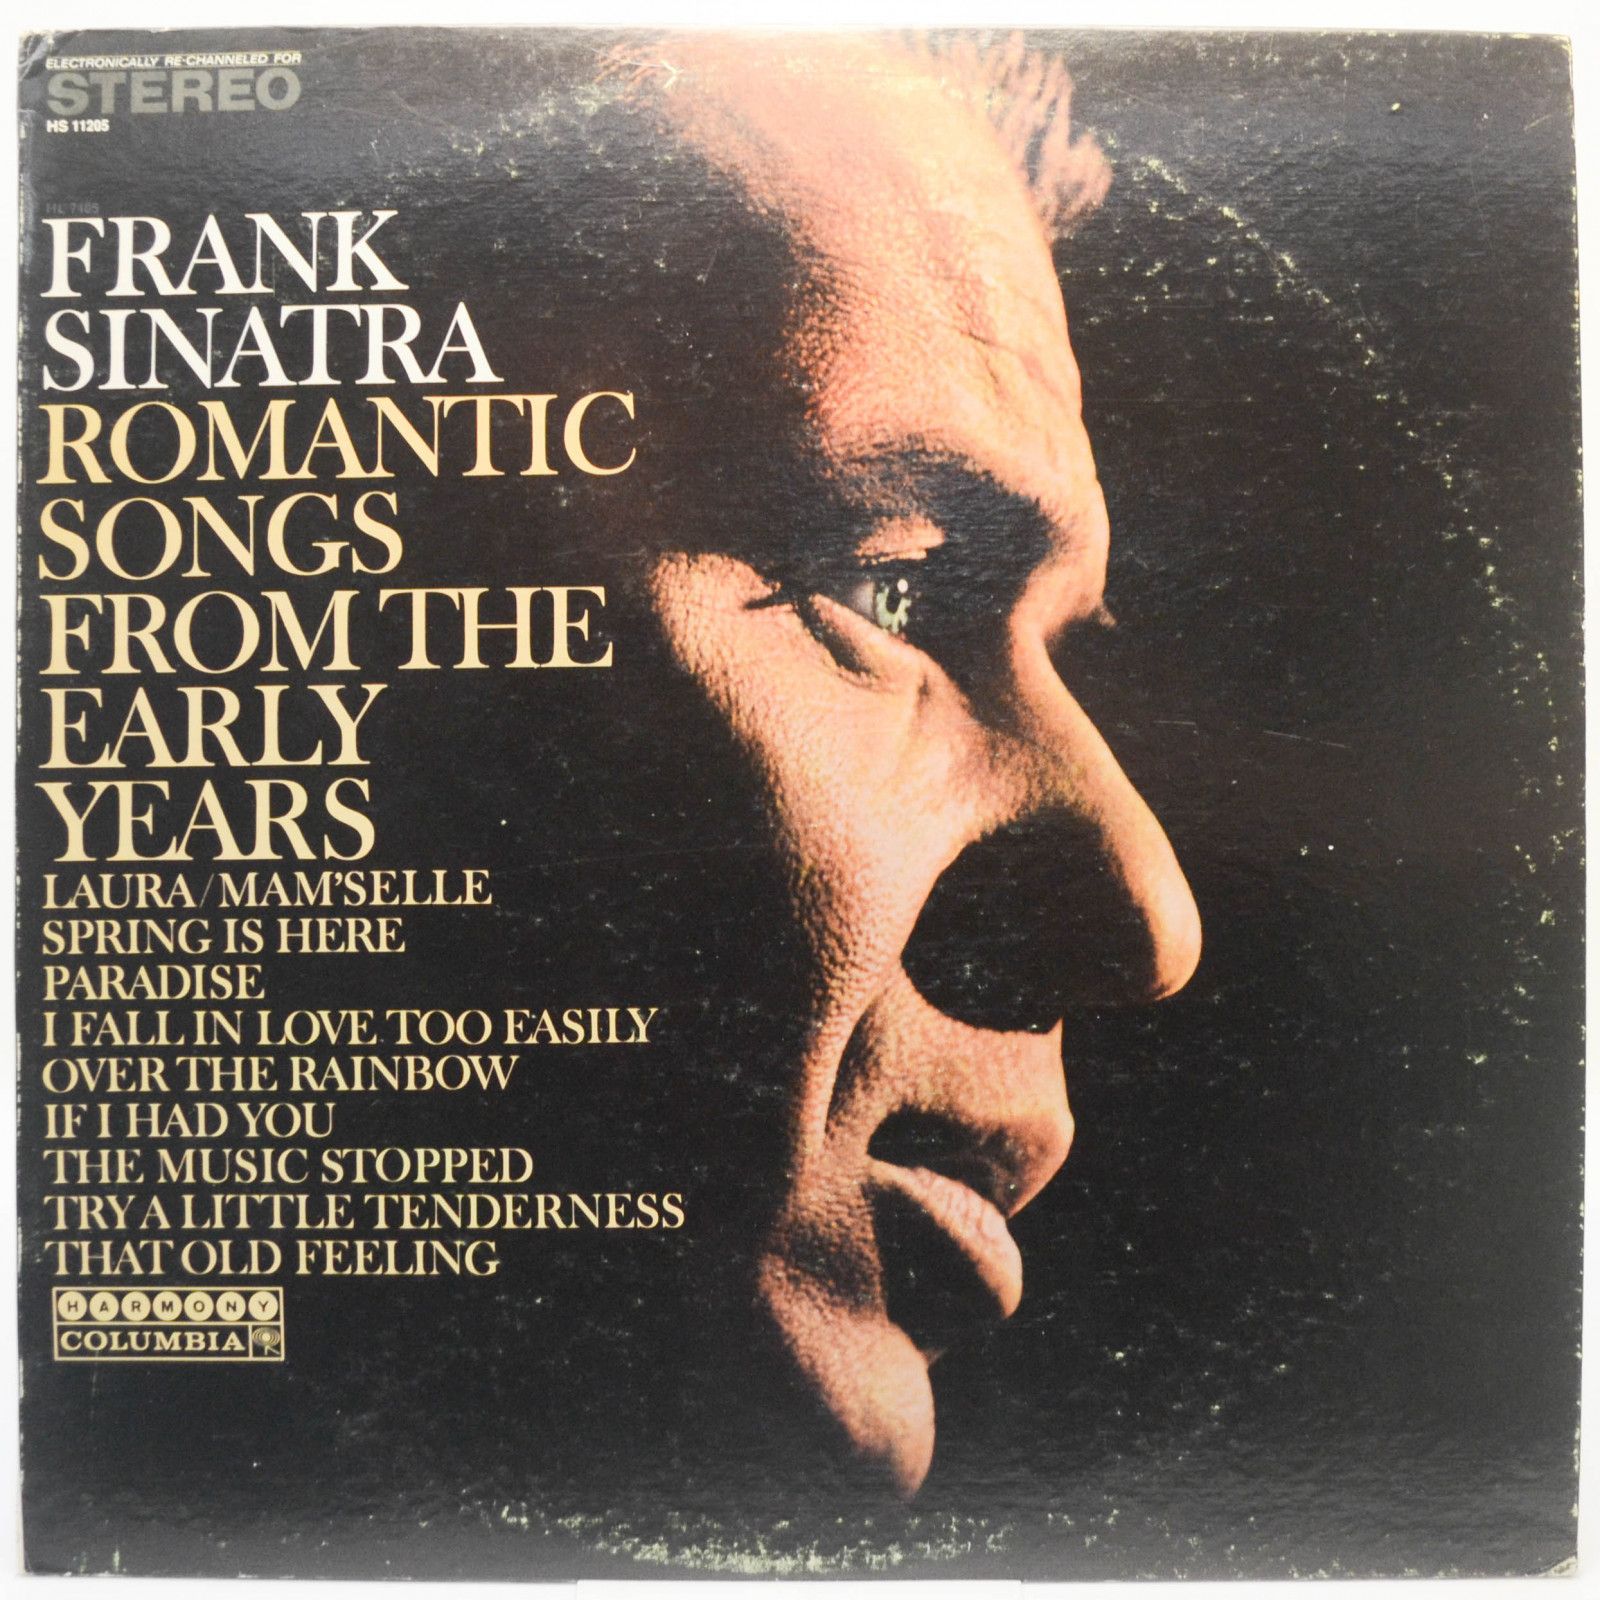 Frank Sinatra — Romantic Songs From The Early Years (USA), 1967